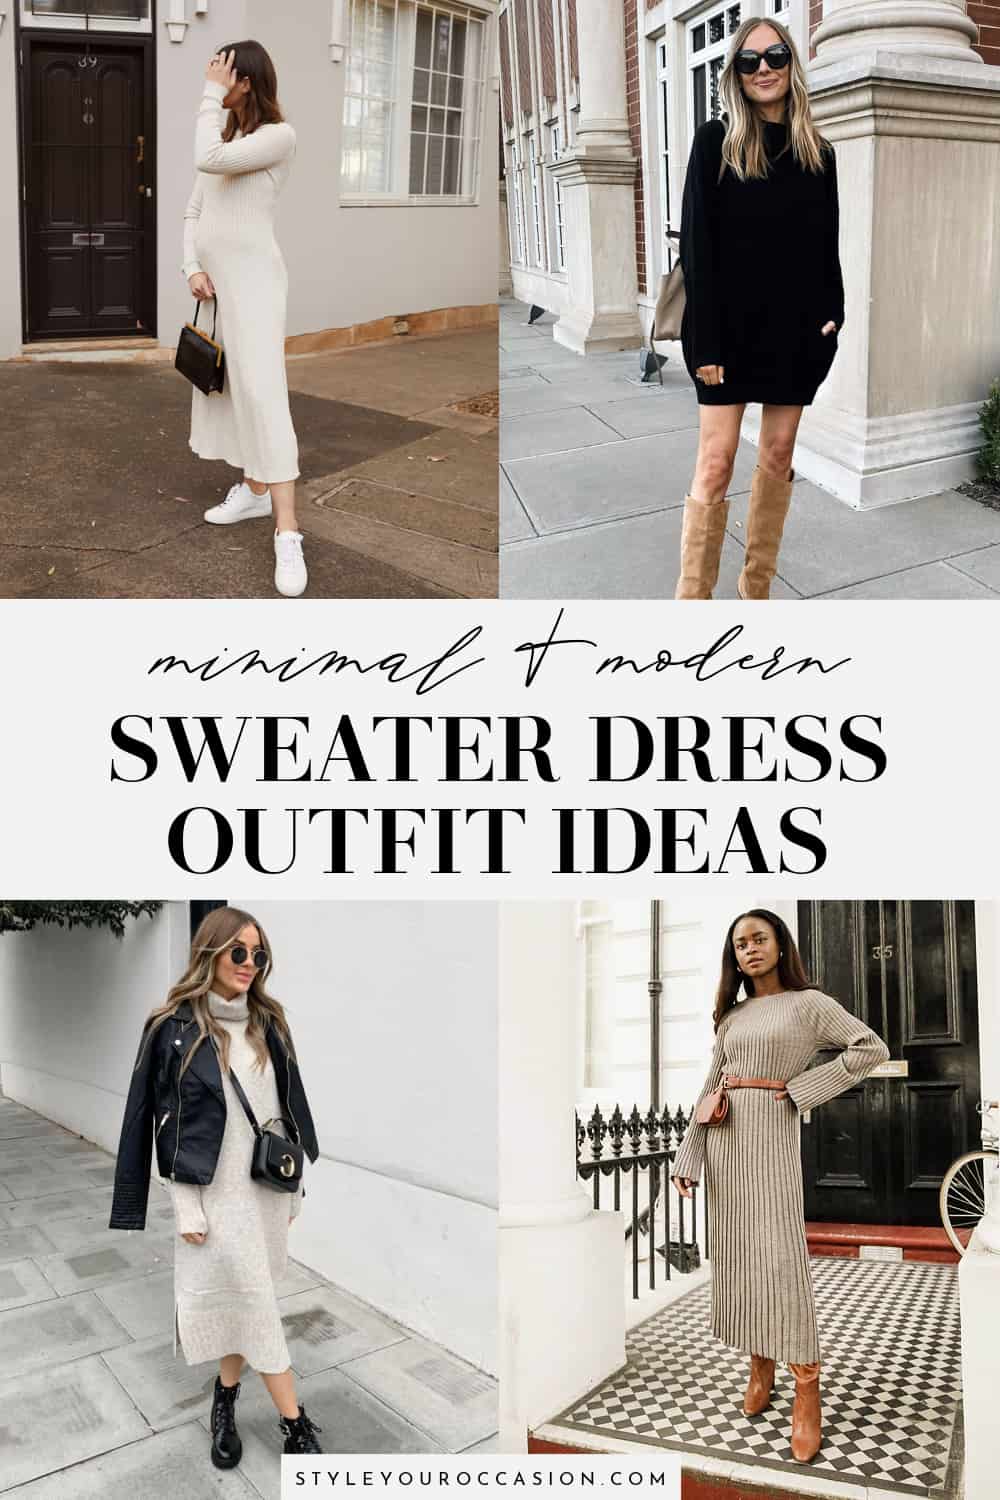 The Best Shoes To Wear With Sweater Dresses + 10 *Chic* Outfits!